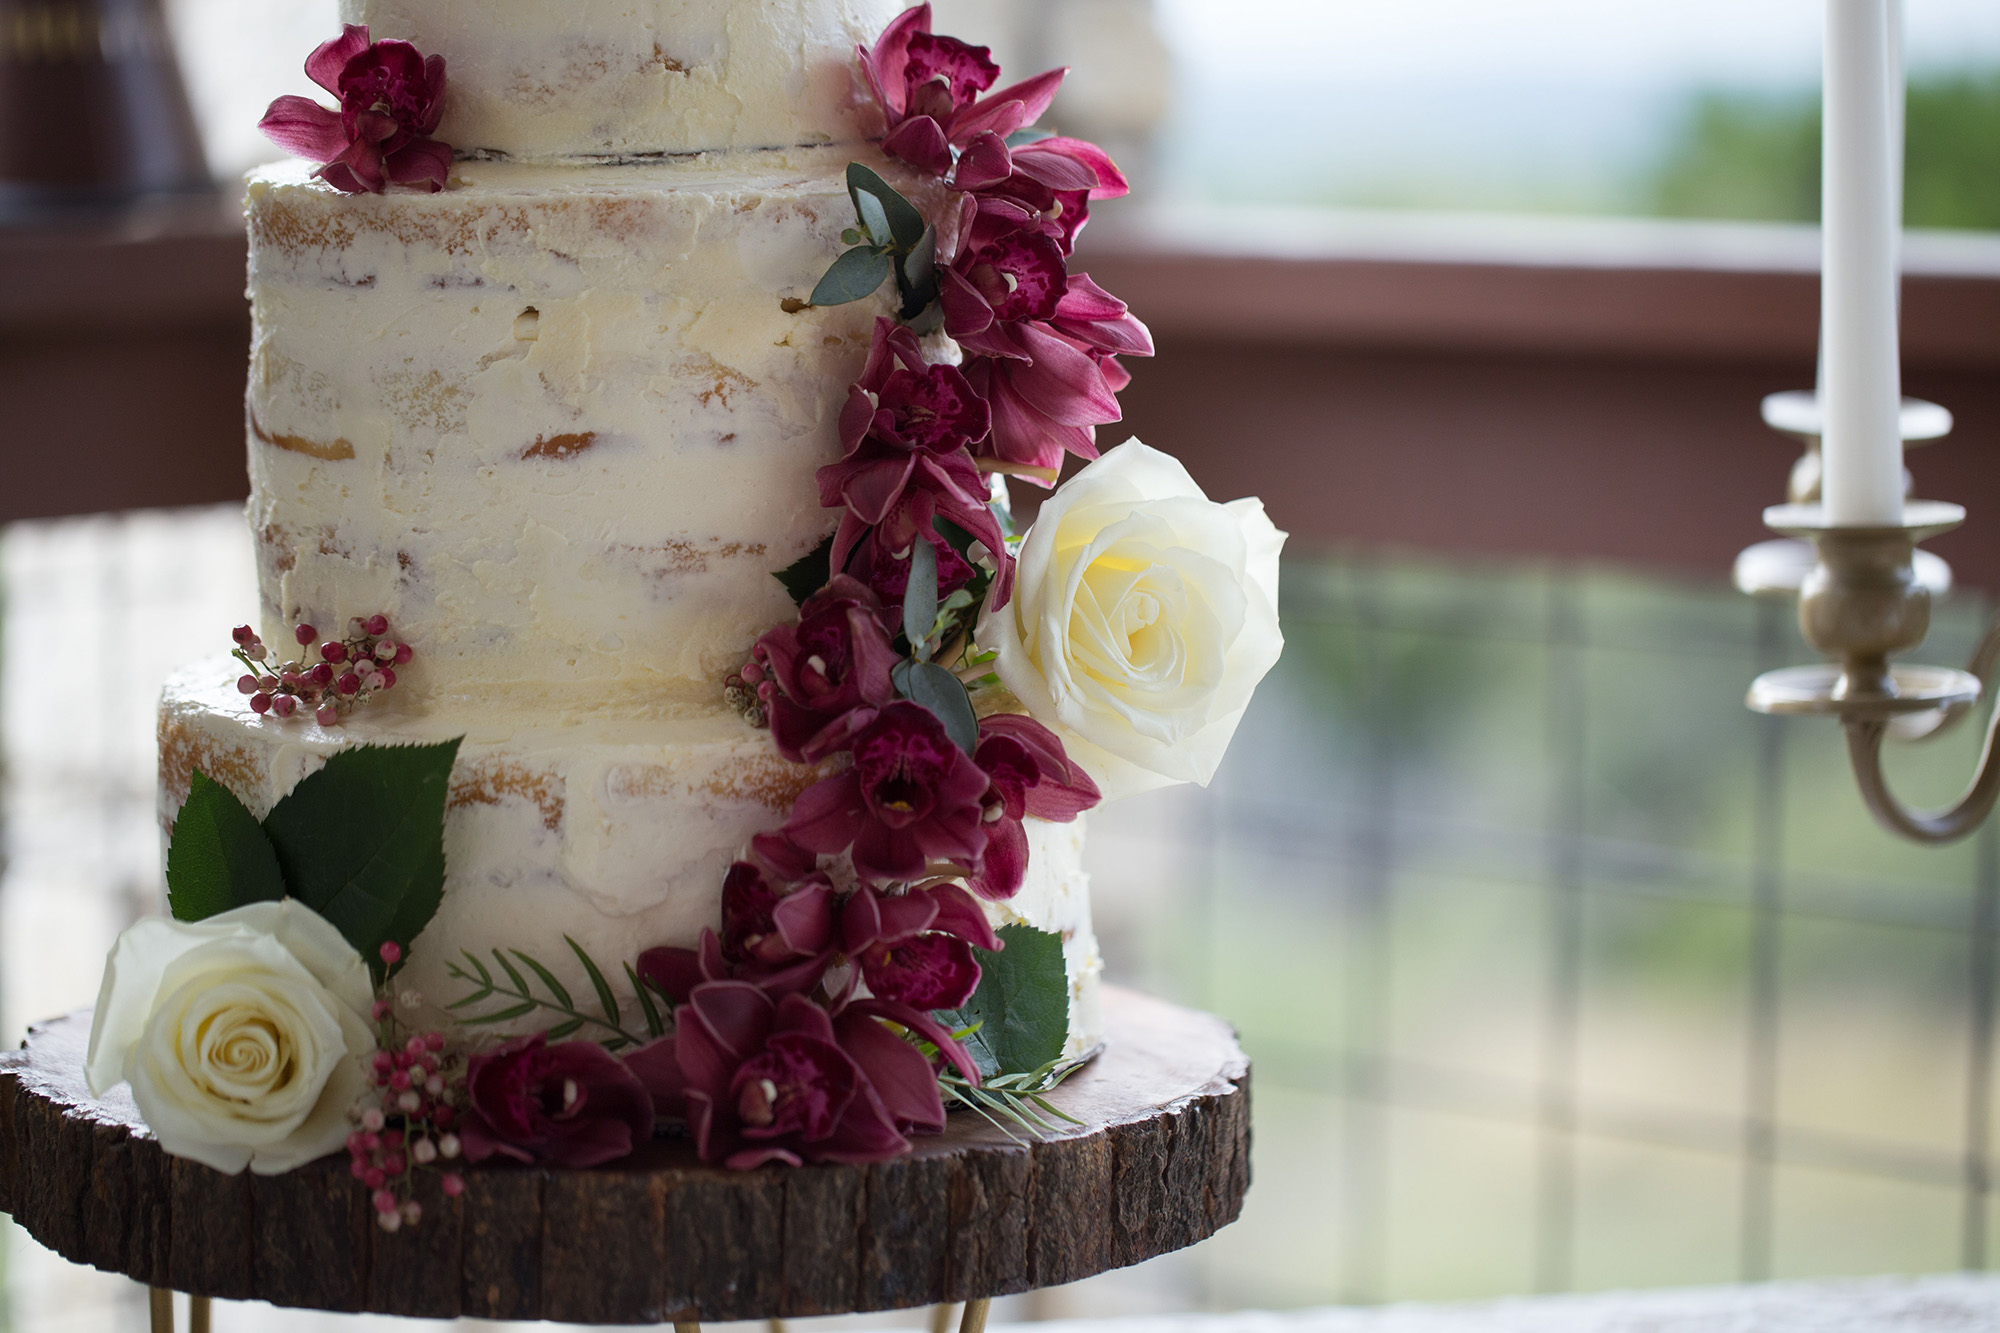  Wedding  Cake  Trends  for 2020  Complete Weddings  Events